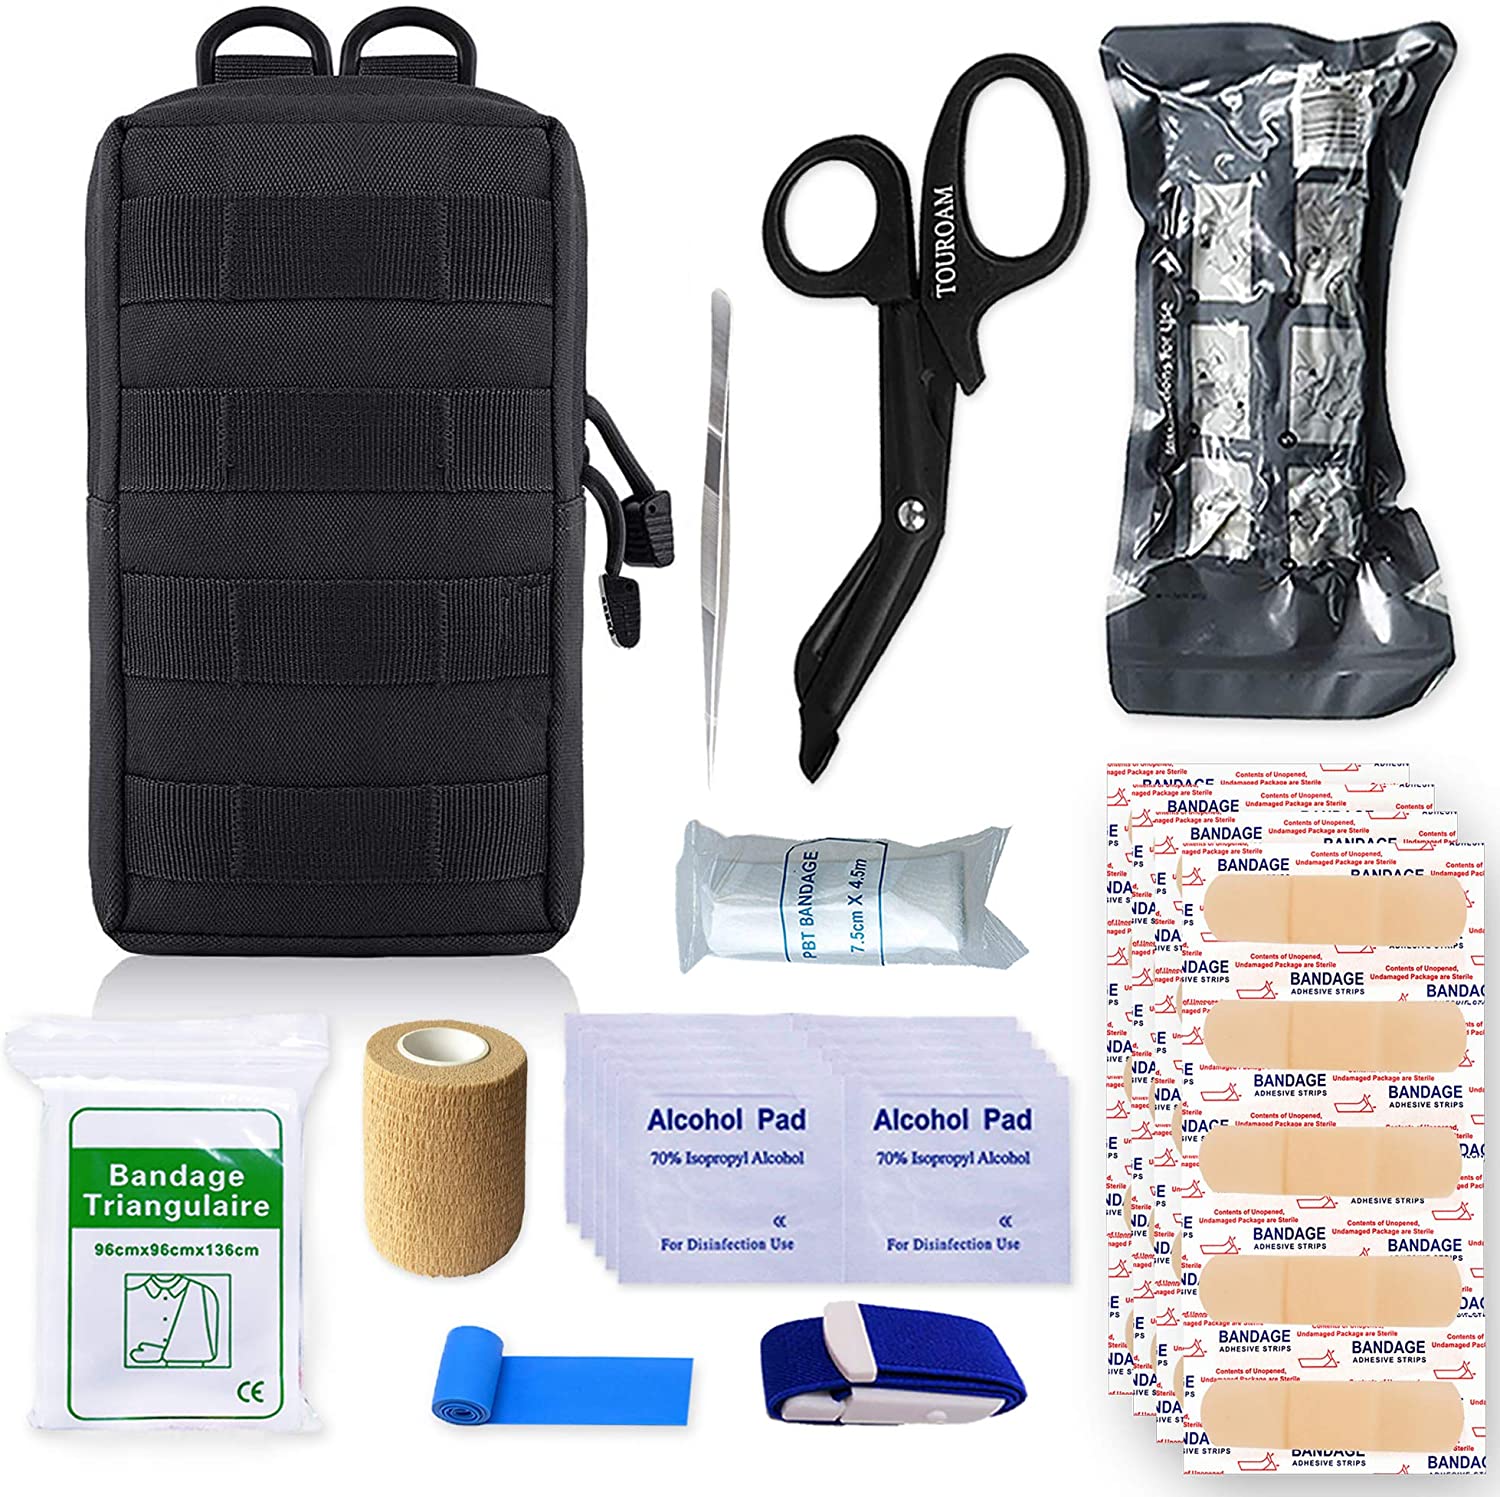 Emergency Kit Outdoor Multifunction Camping Gear Survival Kit First Aid Kit  Sos Emergency Medical Kit Trauma Bag Molle Pouch - Safety & Survival -  AliExpress